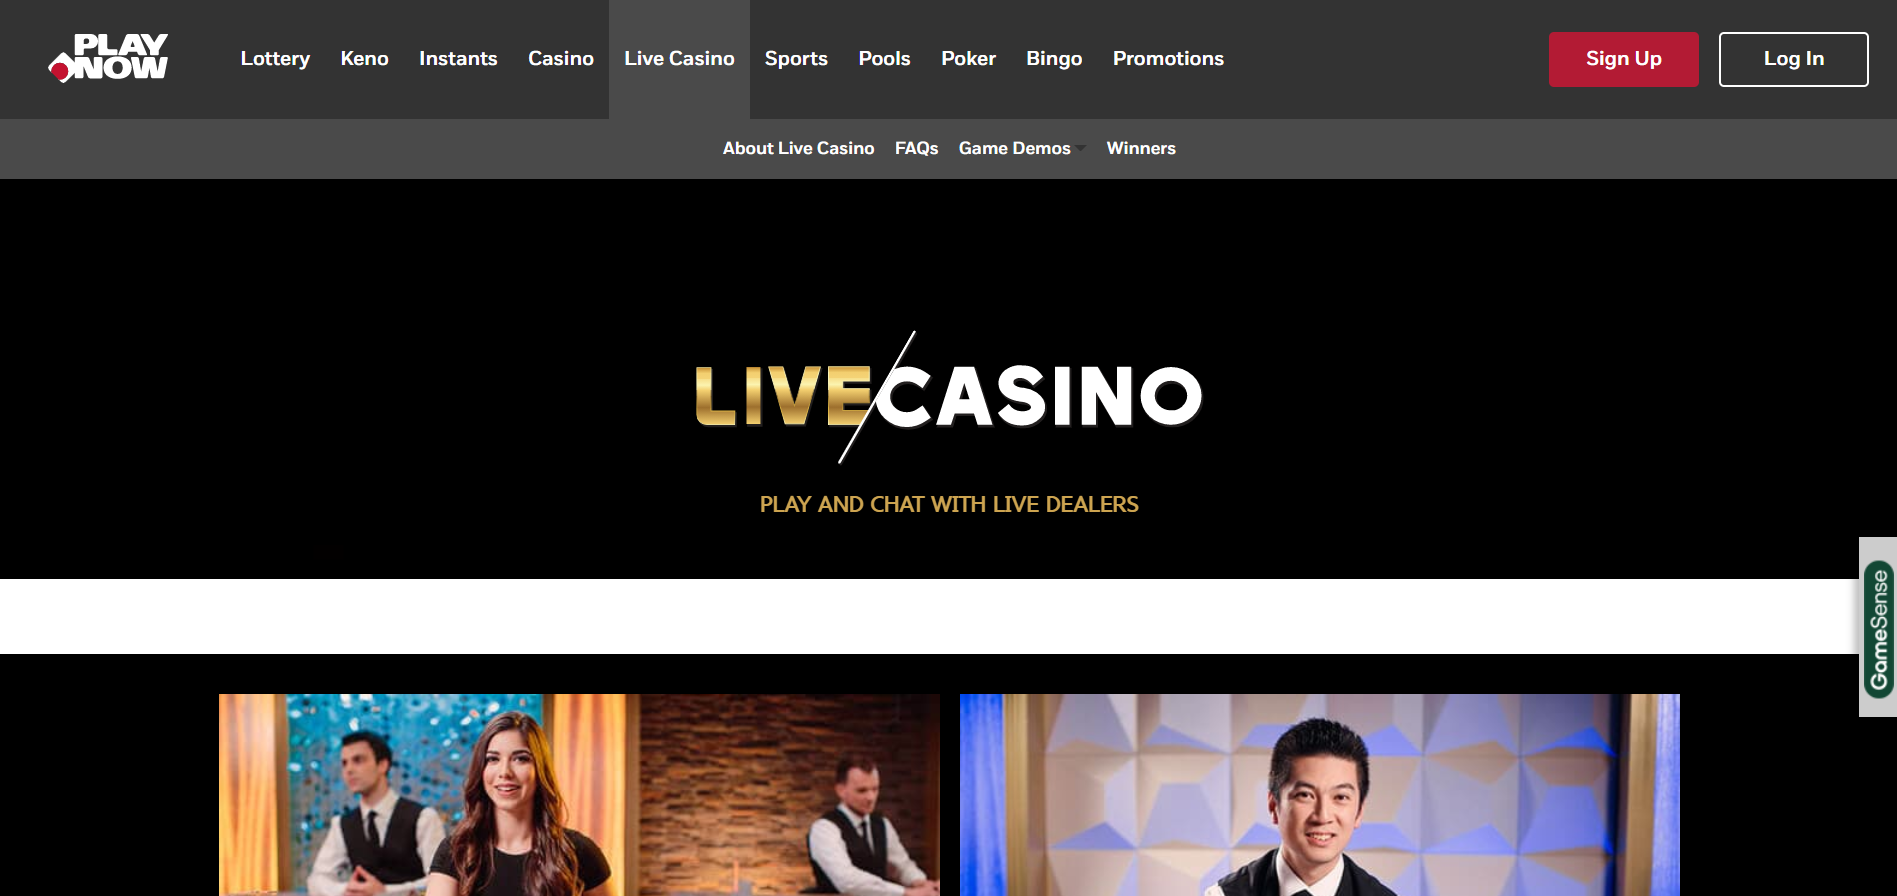 Play Now Live Casino Review Image